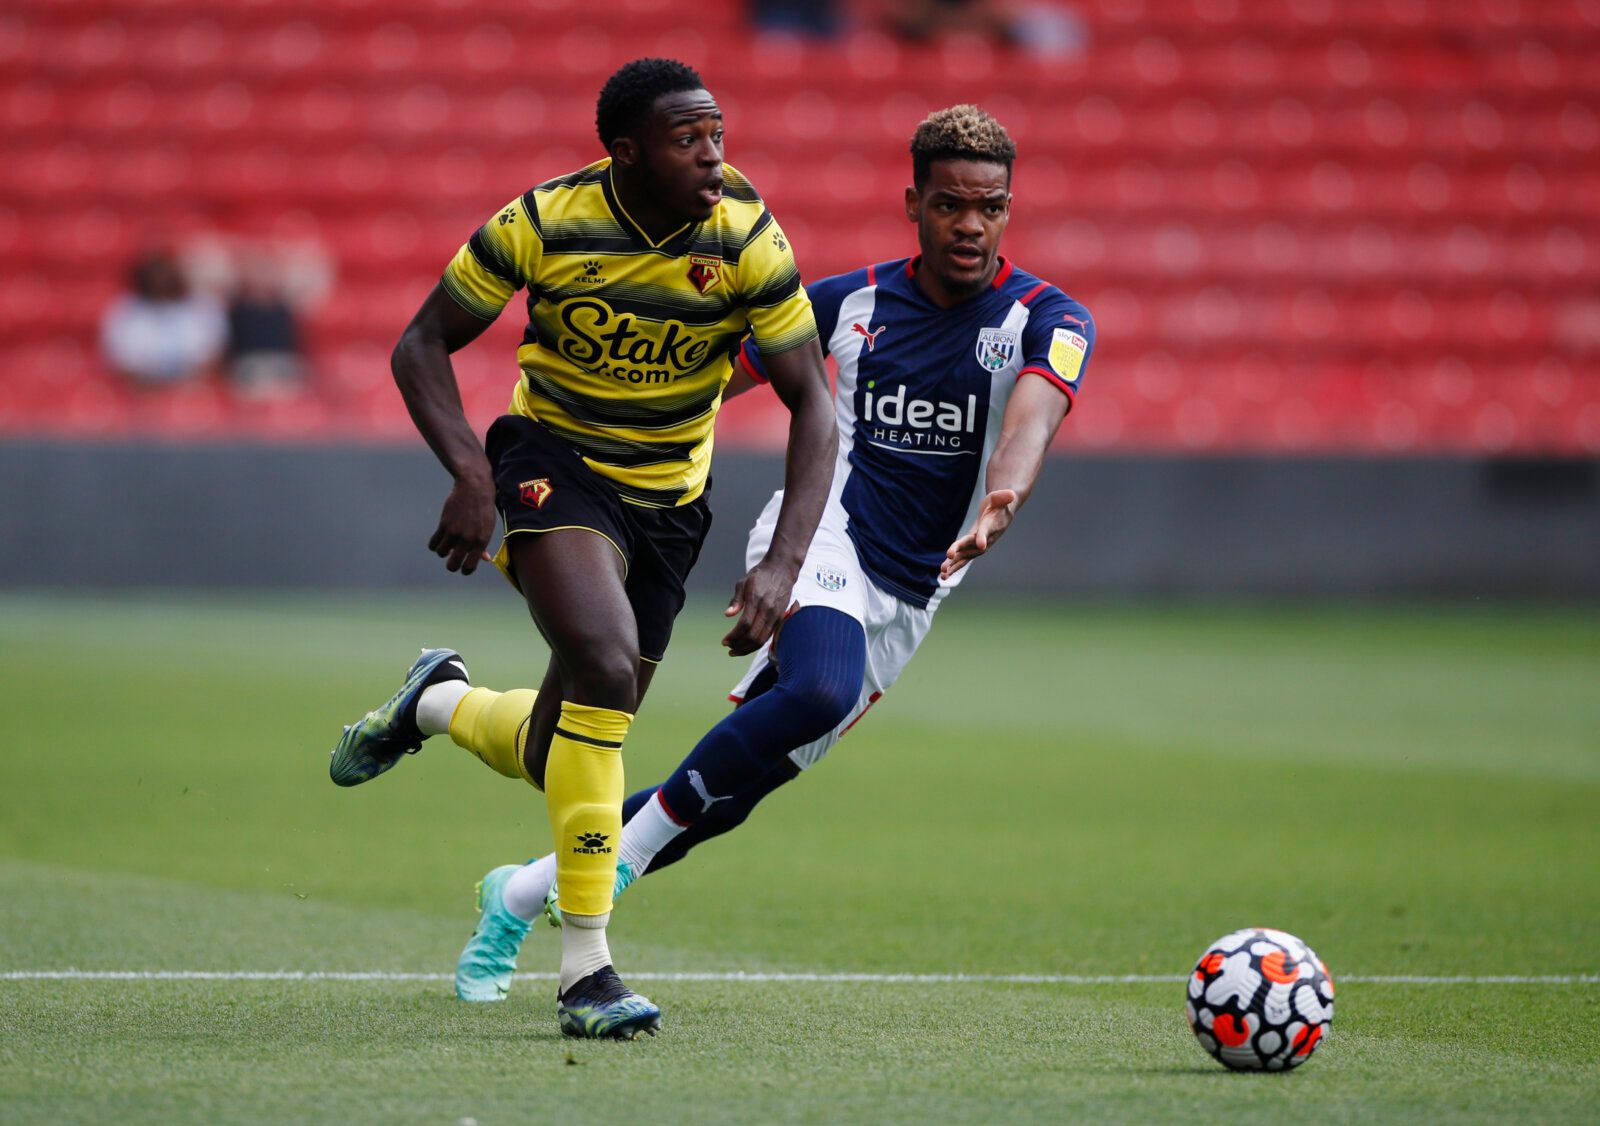 Soccer Football - Pre Season Friendly - Watford v West Bromwich Albion - Vicarage Road, Watford, Britain - July 24, 2021 Watford's Jeremy Ngakia in action with West Bromwich Albion's Grady Diangana Action Images via Reuters/Paul Childs